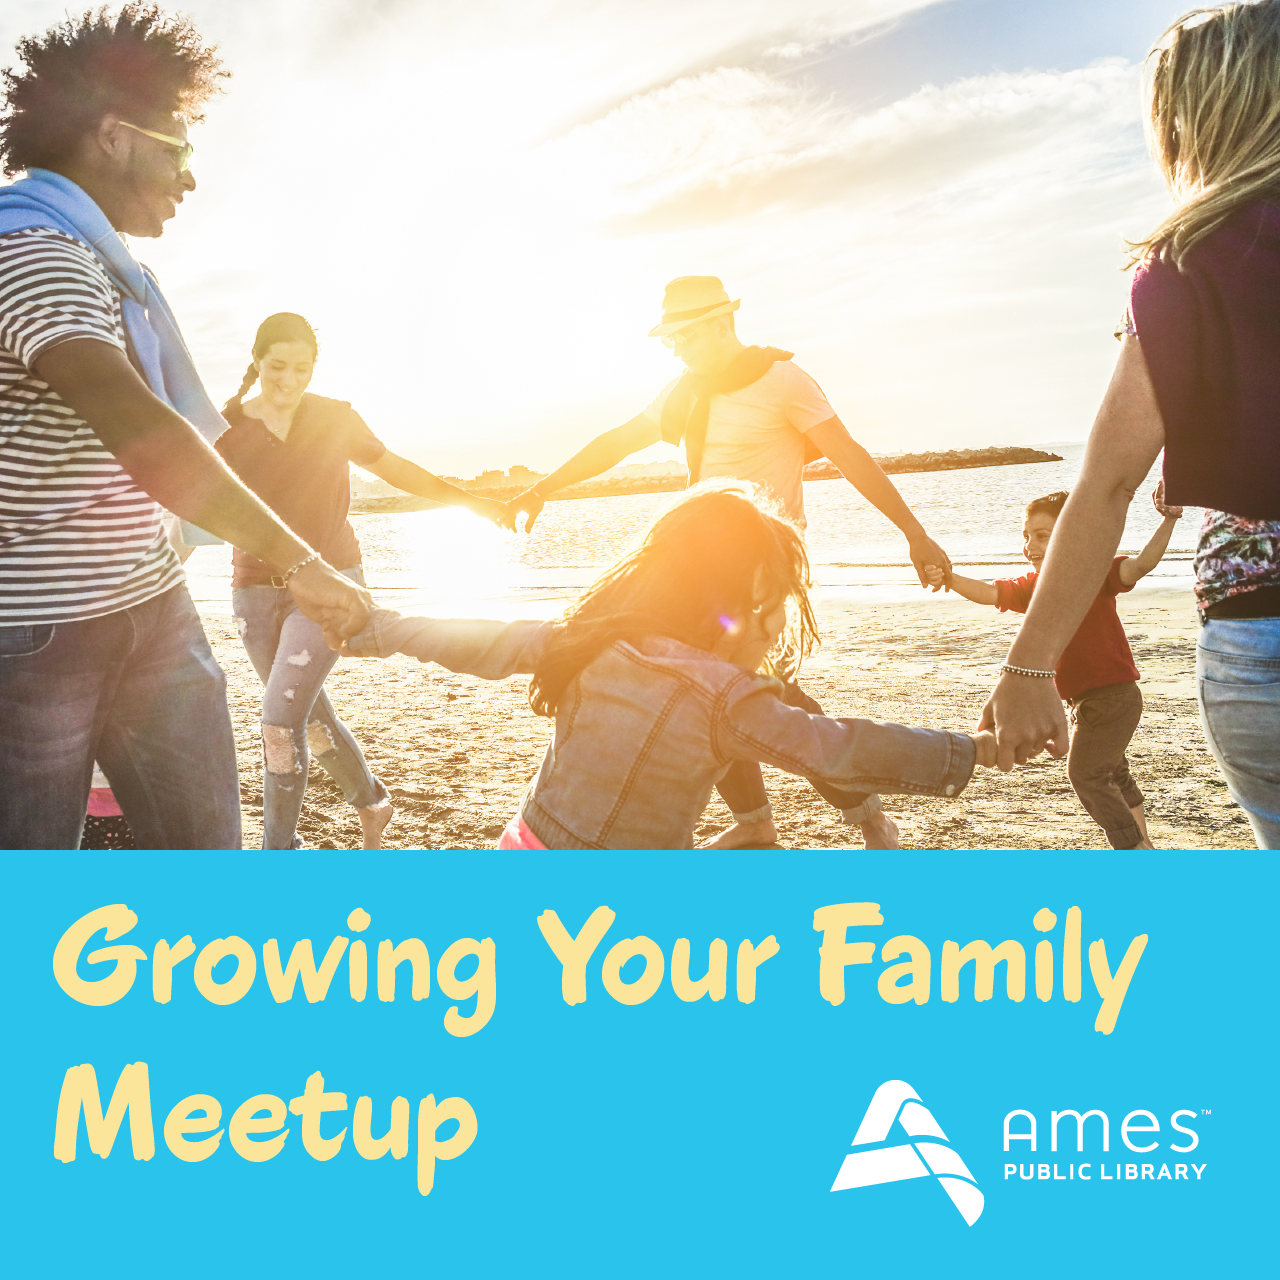 Growing Your Family Meetup